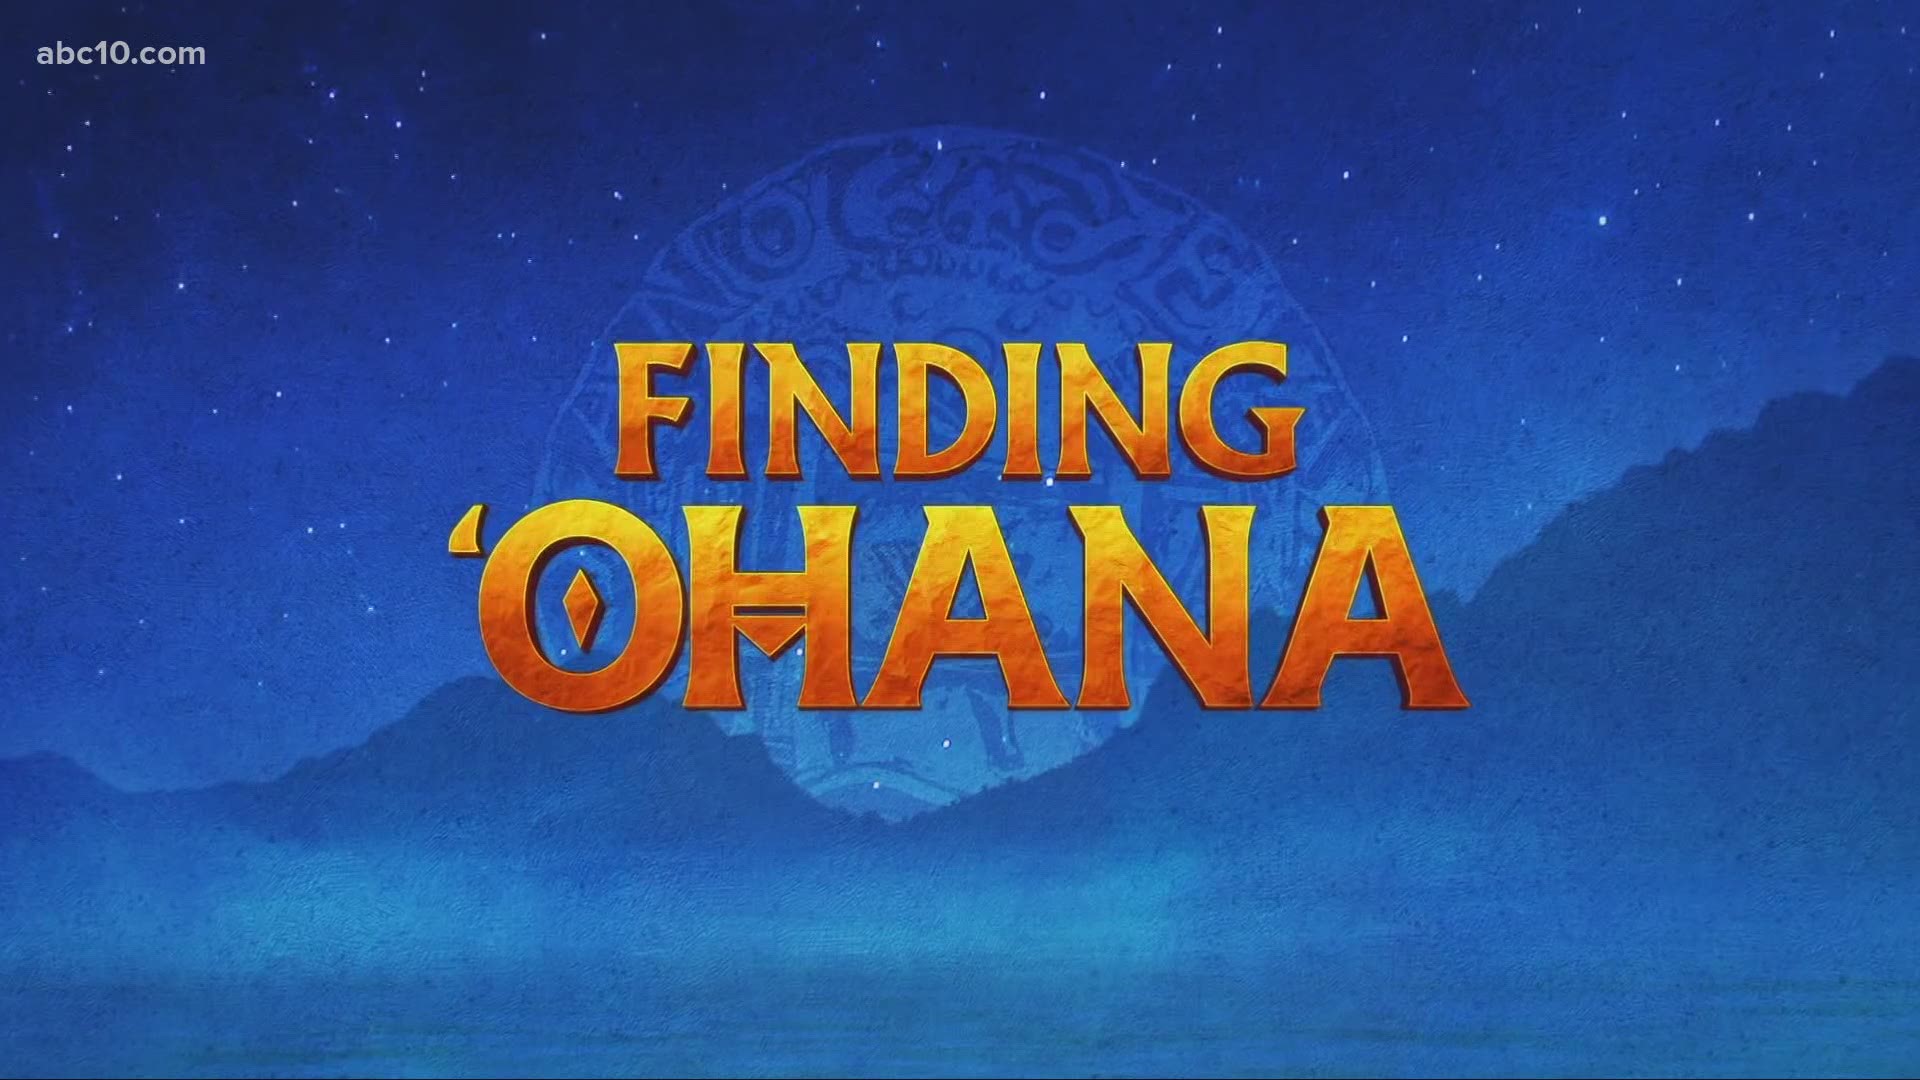 Mark S. Allen talks to the cast of 'Finding Ohana' who talks about how much they loved showing off the Hawaiian islands and island culture.